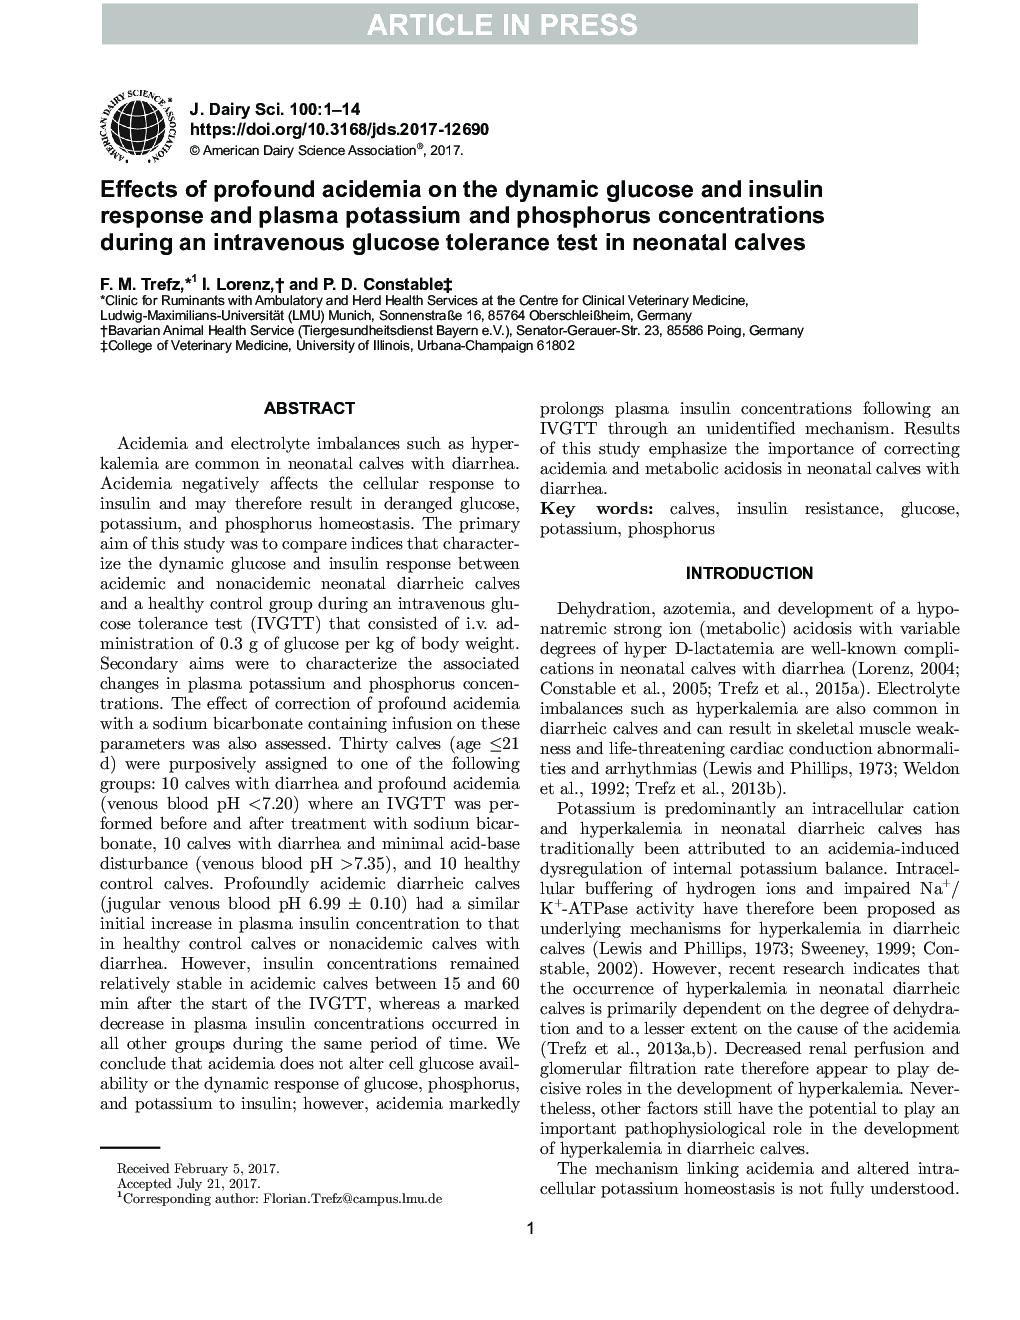 Effects of profound acidemia on the dynamic glucose and insulin response and plasma potassium and phosphorus concentrations during an intravenous glucose tolerance test in neonatal calves